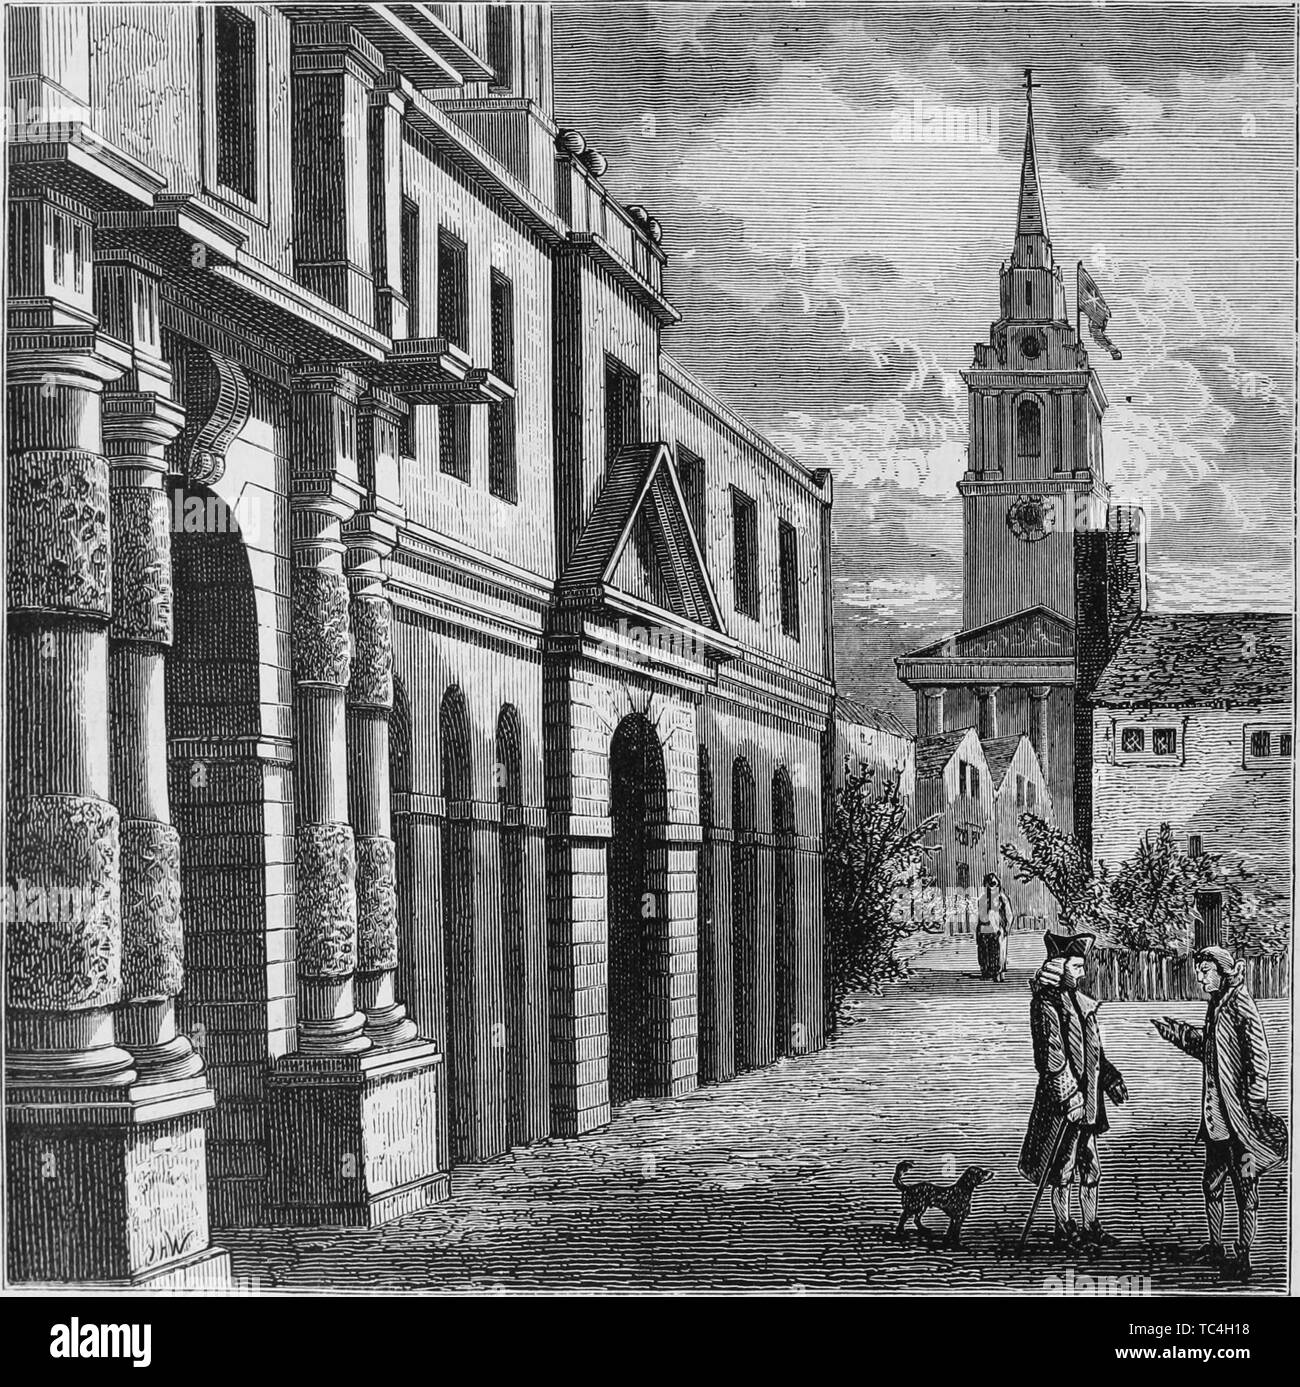 Engraving of the King's Mews at Charing Cross, London, England, from the book 'Old and new London: a narrative of its history, its people, and its places' by Thornbury Walter, 1873. Courtesy Internet Archive. () Stock Photo